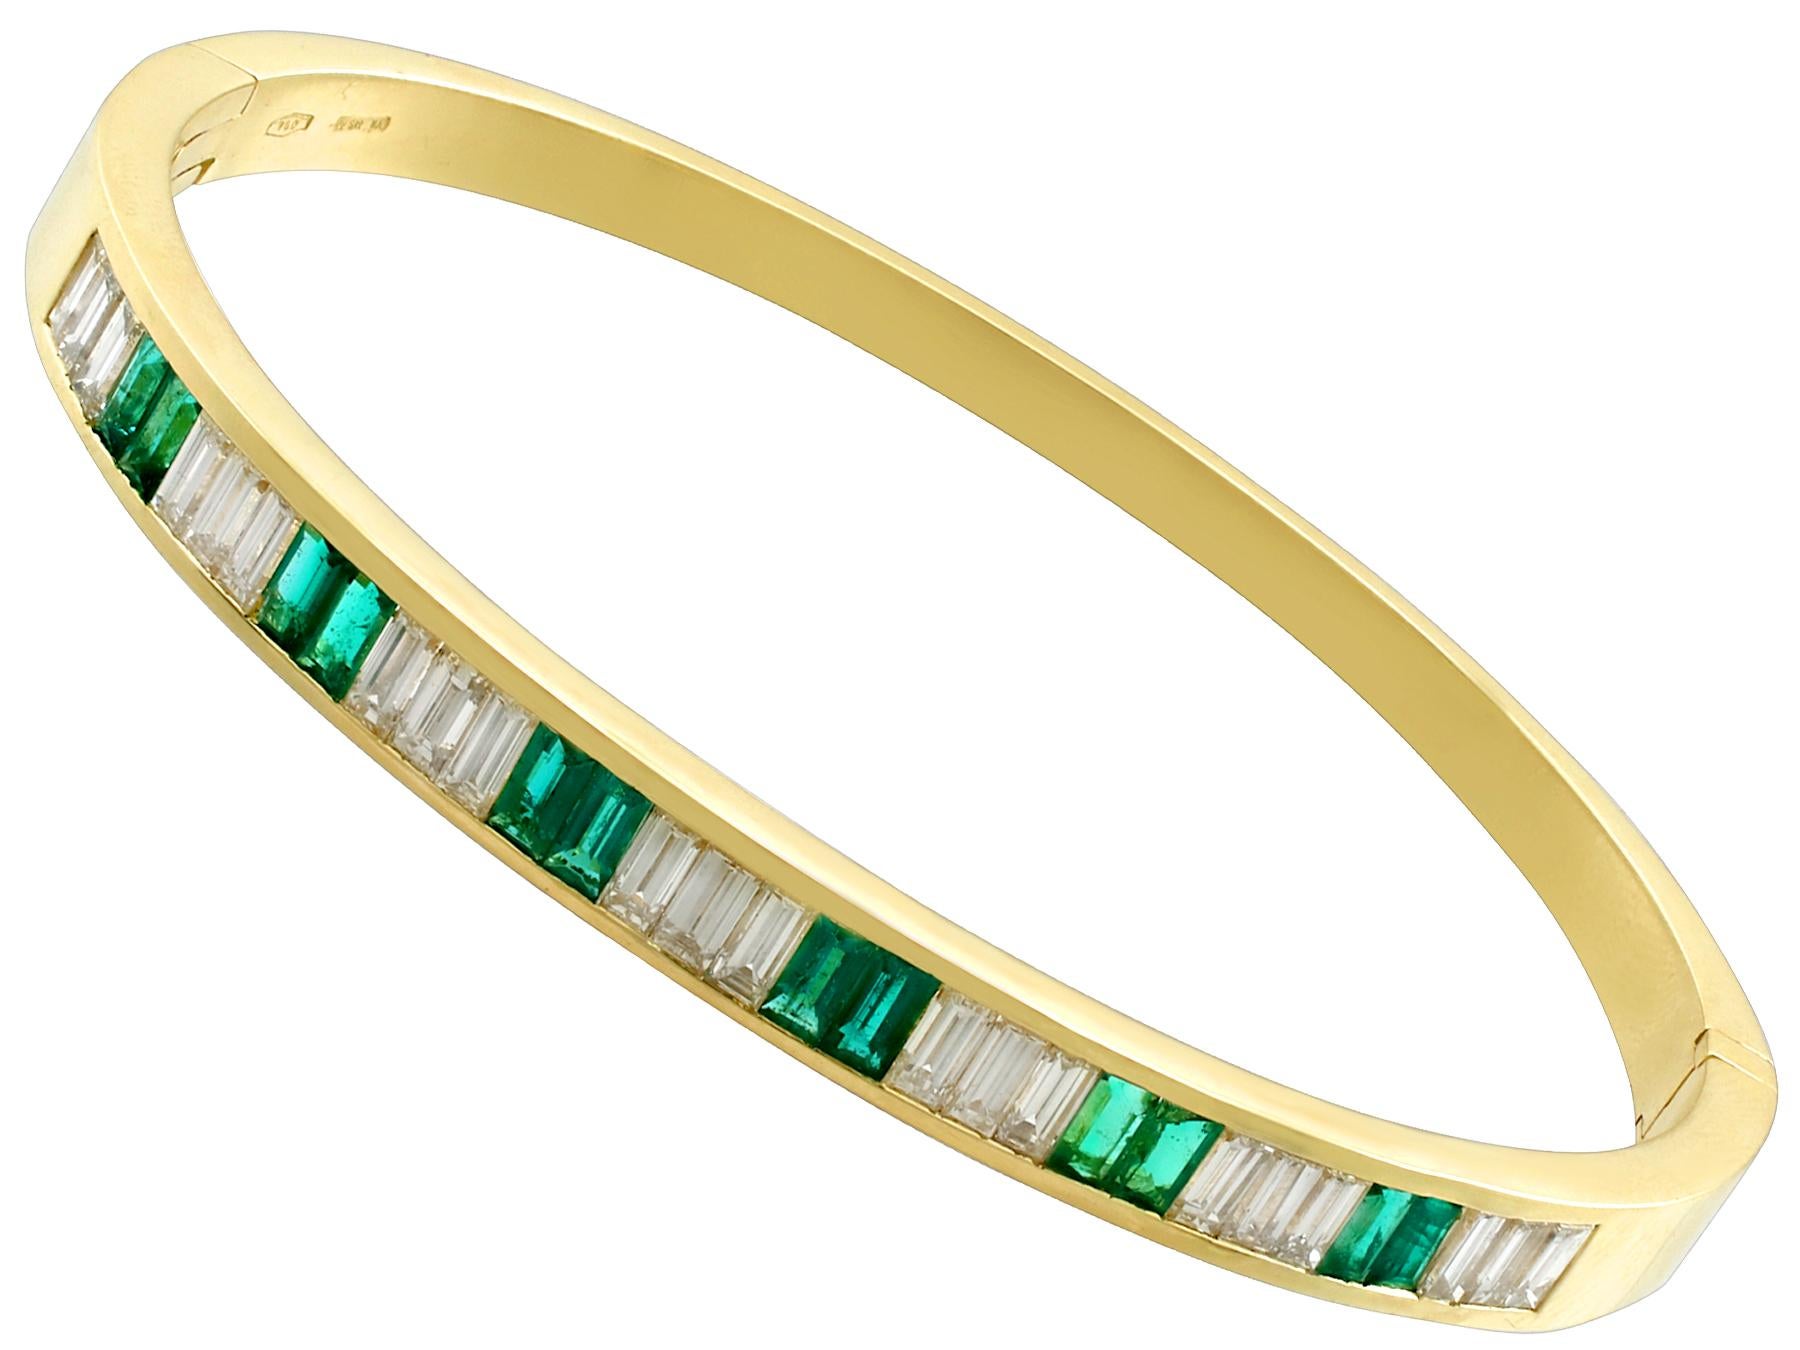 A fine and impressive contemporary Italian 2.31 carat diamond and 1.35 carat emerald, 18 carat yellow gold bangle; part of our diverse contemporary jewellery collections.

This fine and impressive emerald and diamond bangle has been crafted in 18k